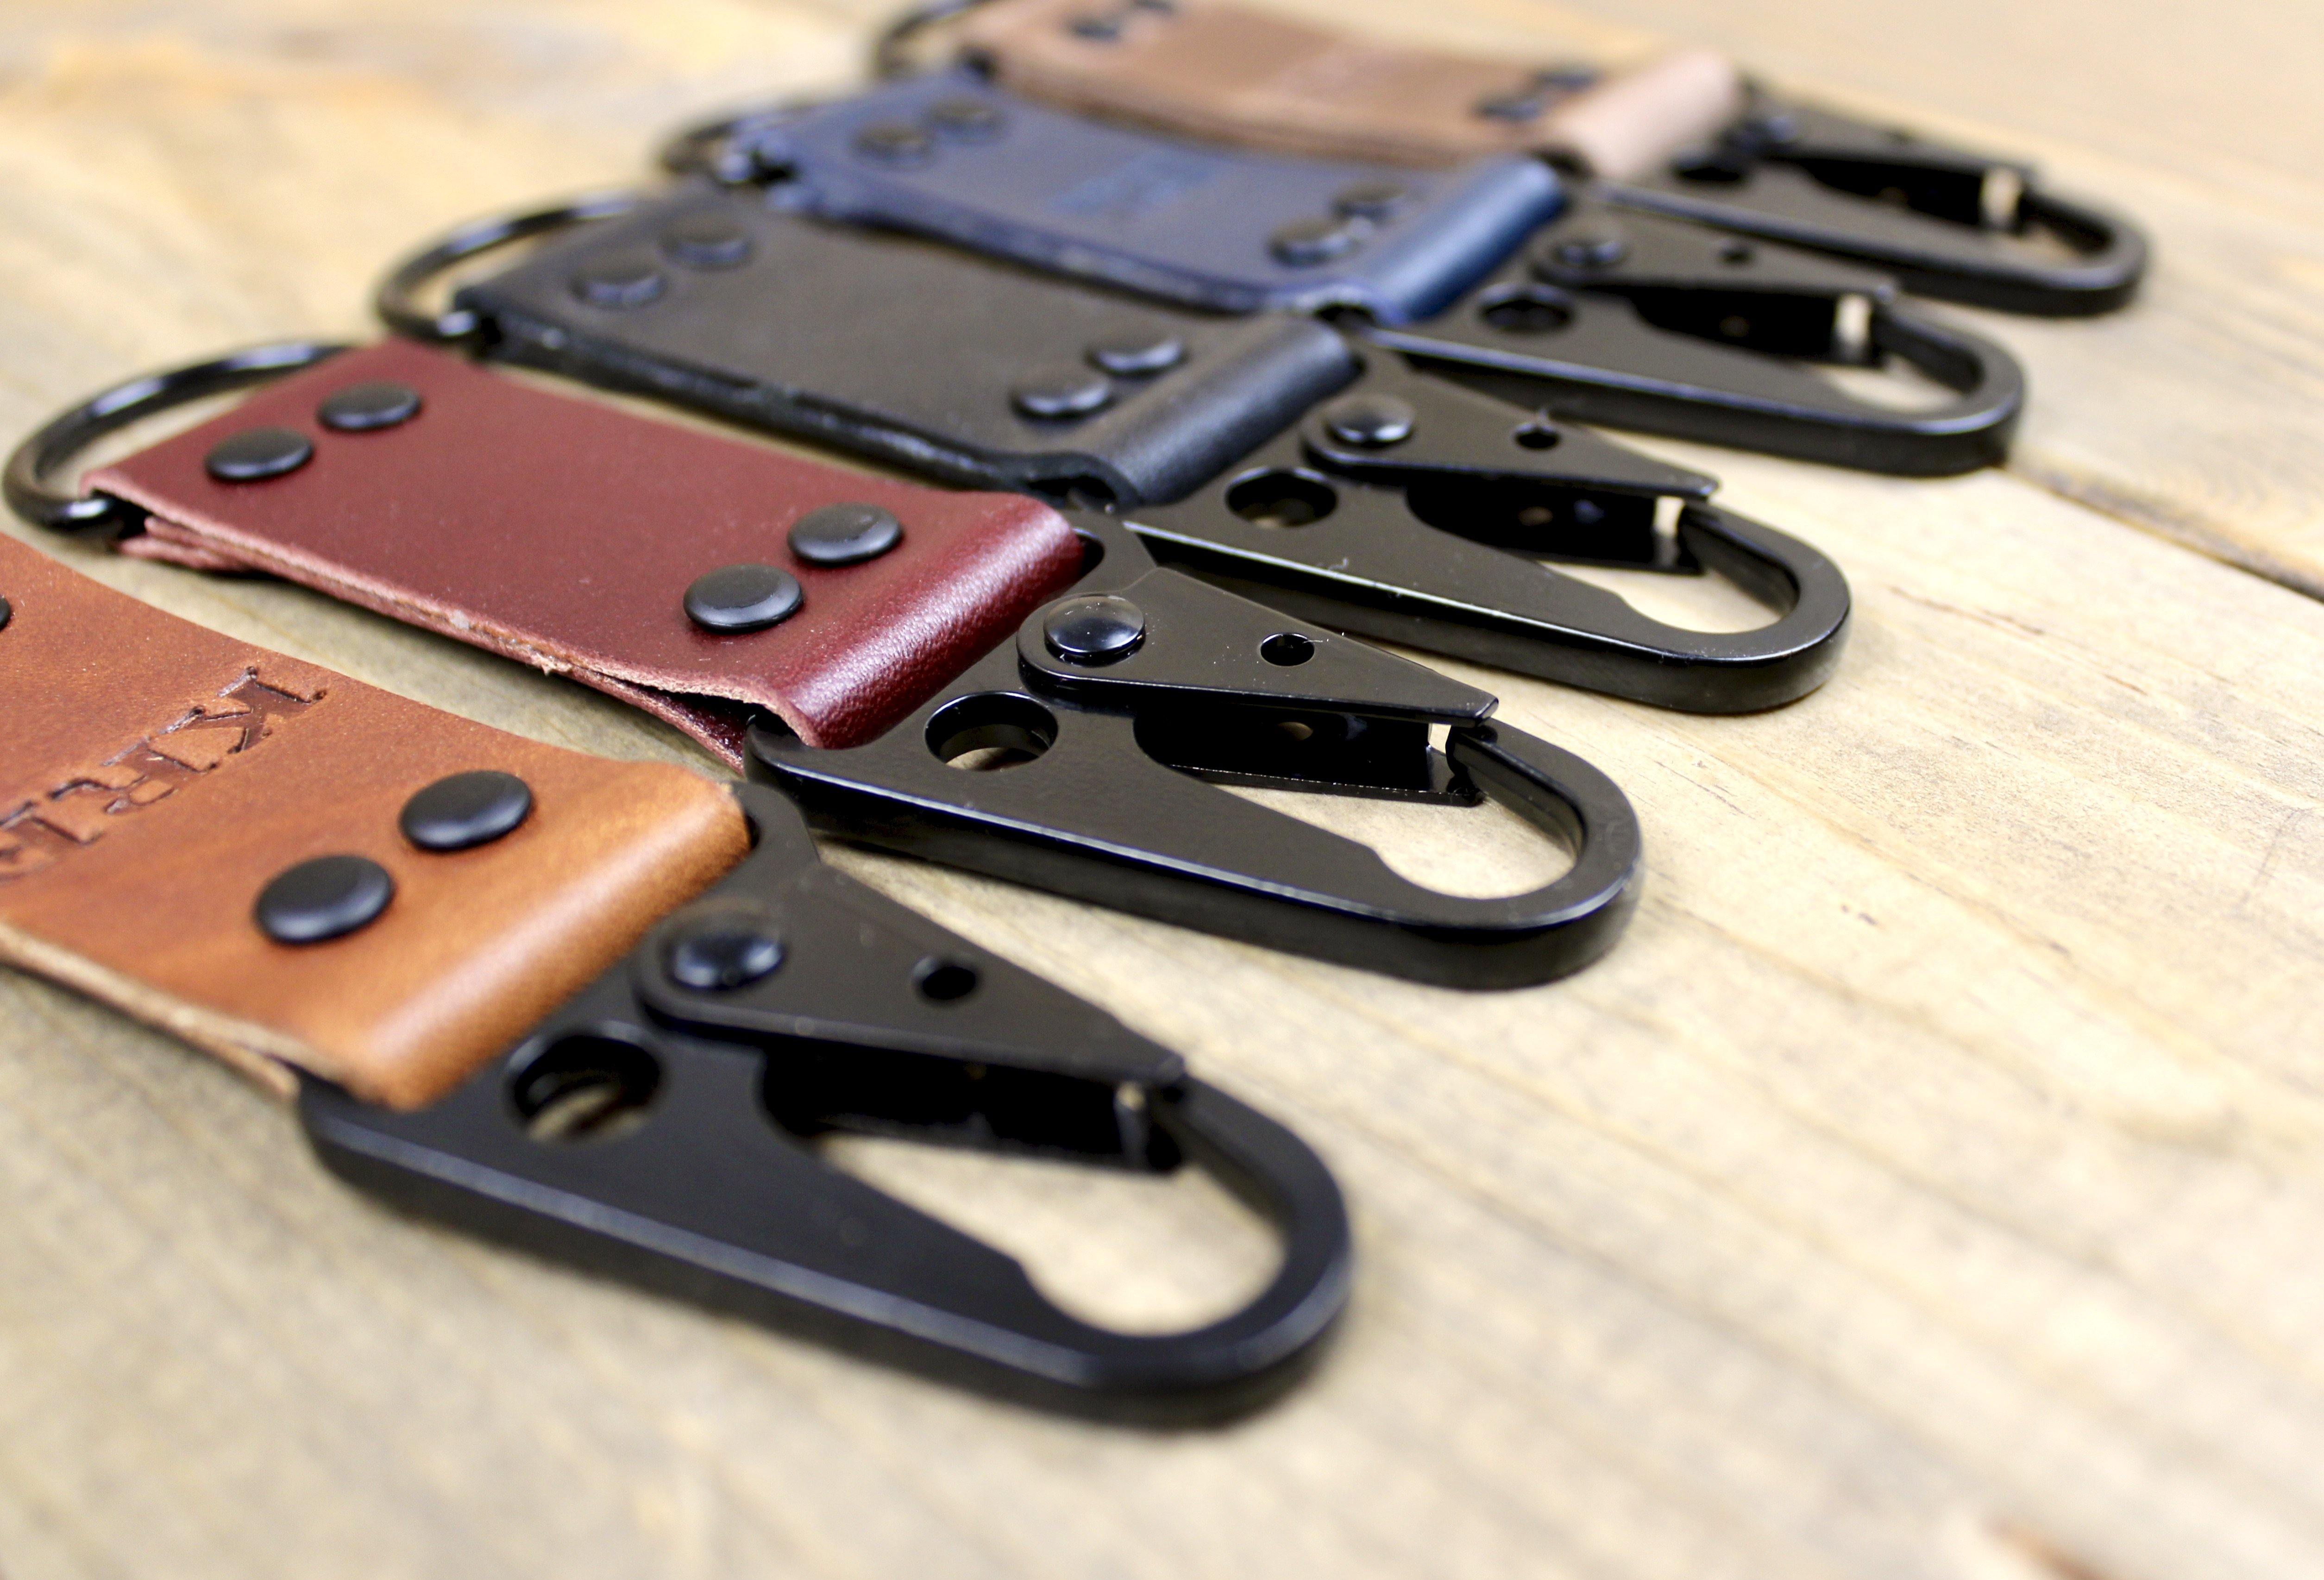 Handmade Leather Belt Clip Keychain | Made in The USA Brown